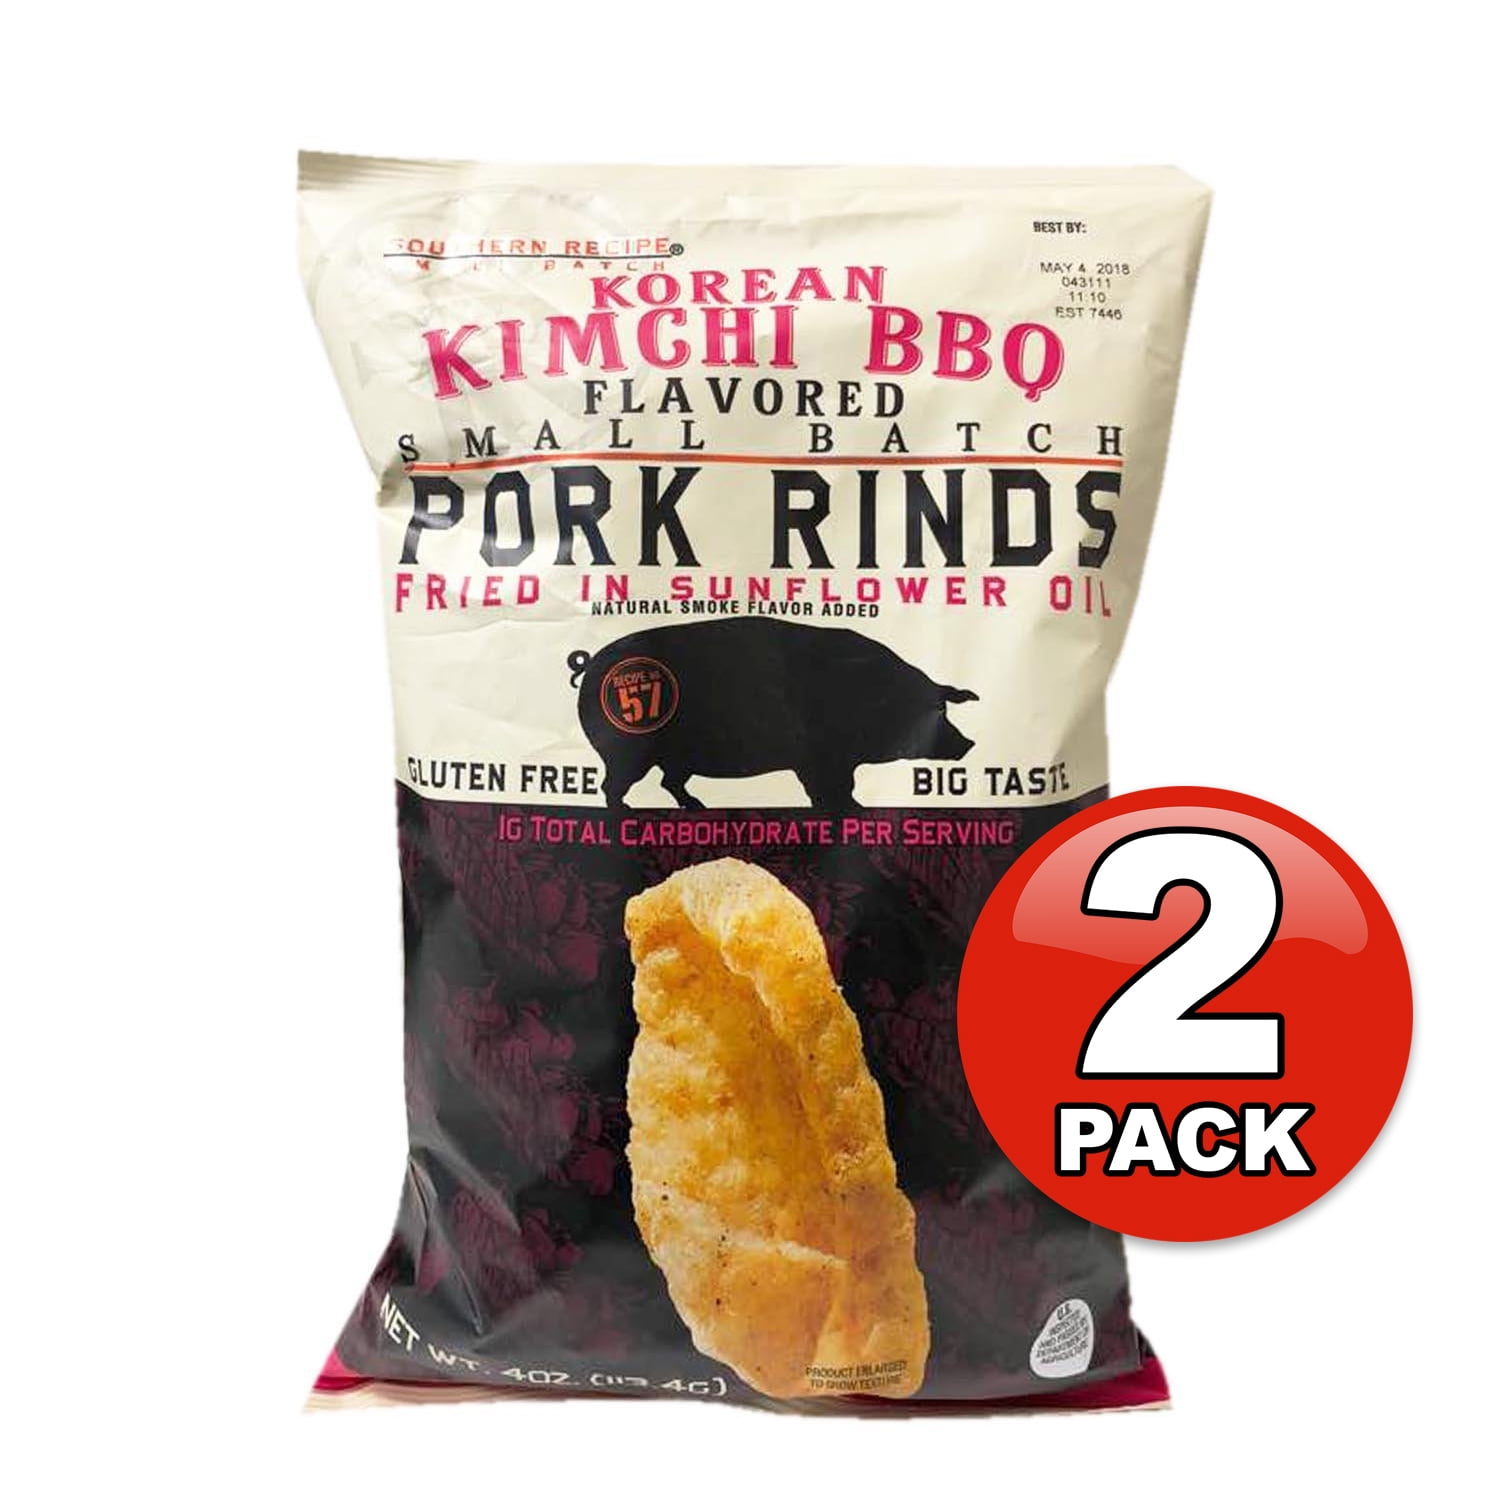 Southern Recipe Small Batch Classic Pork Rinds, Low Carb, Keto-Friendly